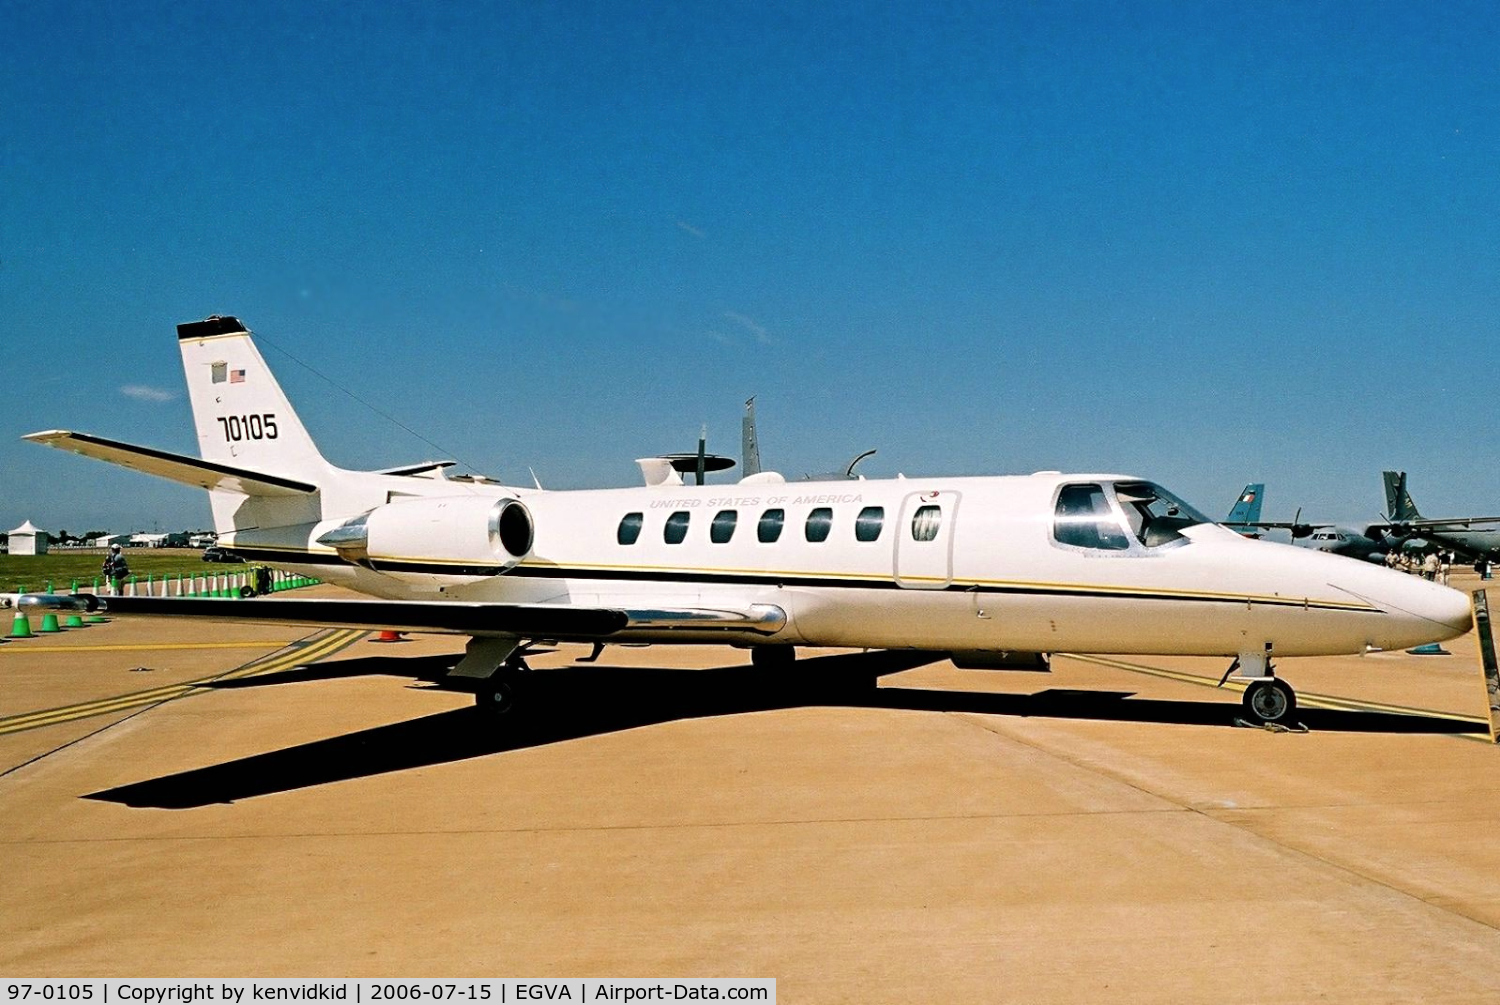 97-0105, 1997 Cessna UC-35A Citation Ultra C/N 560-0472, US Army on static display at RIAT.